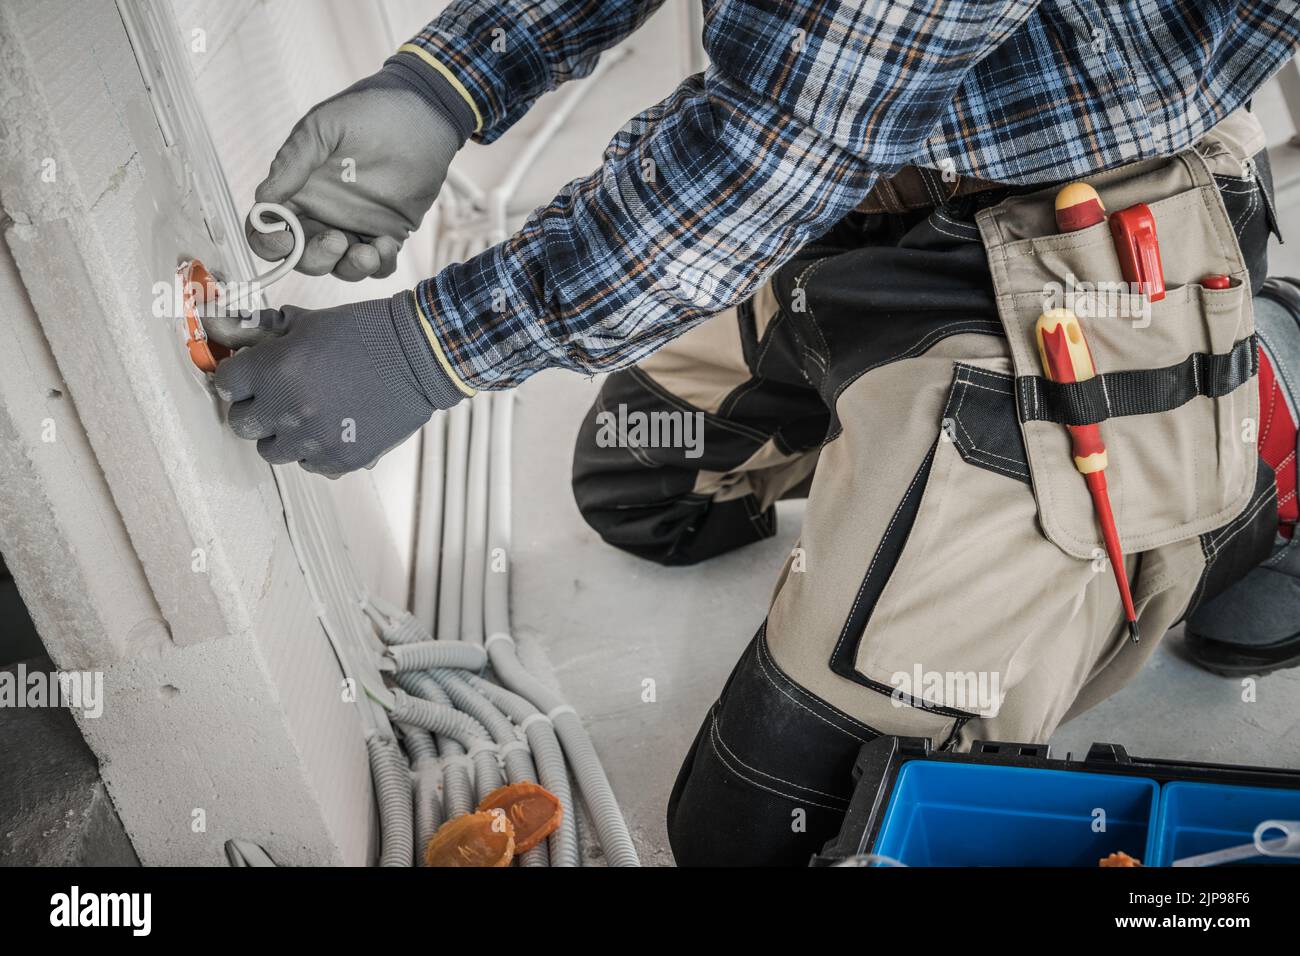 Professional Electrician in Protective Gloves and Tool Belt Working on Installing Power Sockets in the Wall. Plastic Pipeline in the Background. Indus Stock Photo